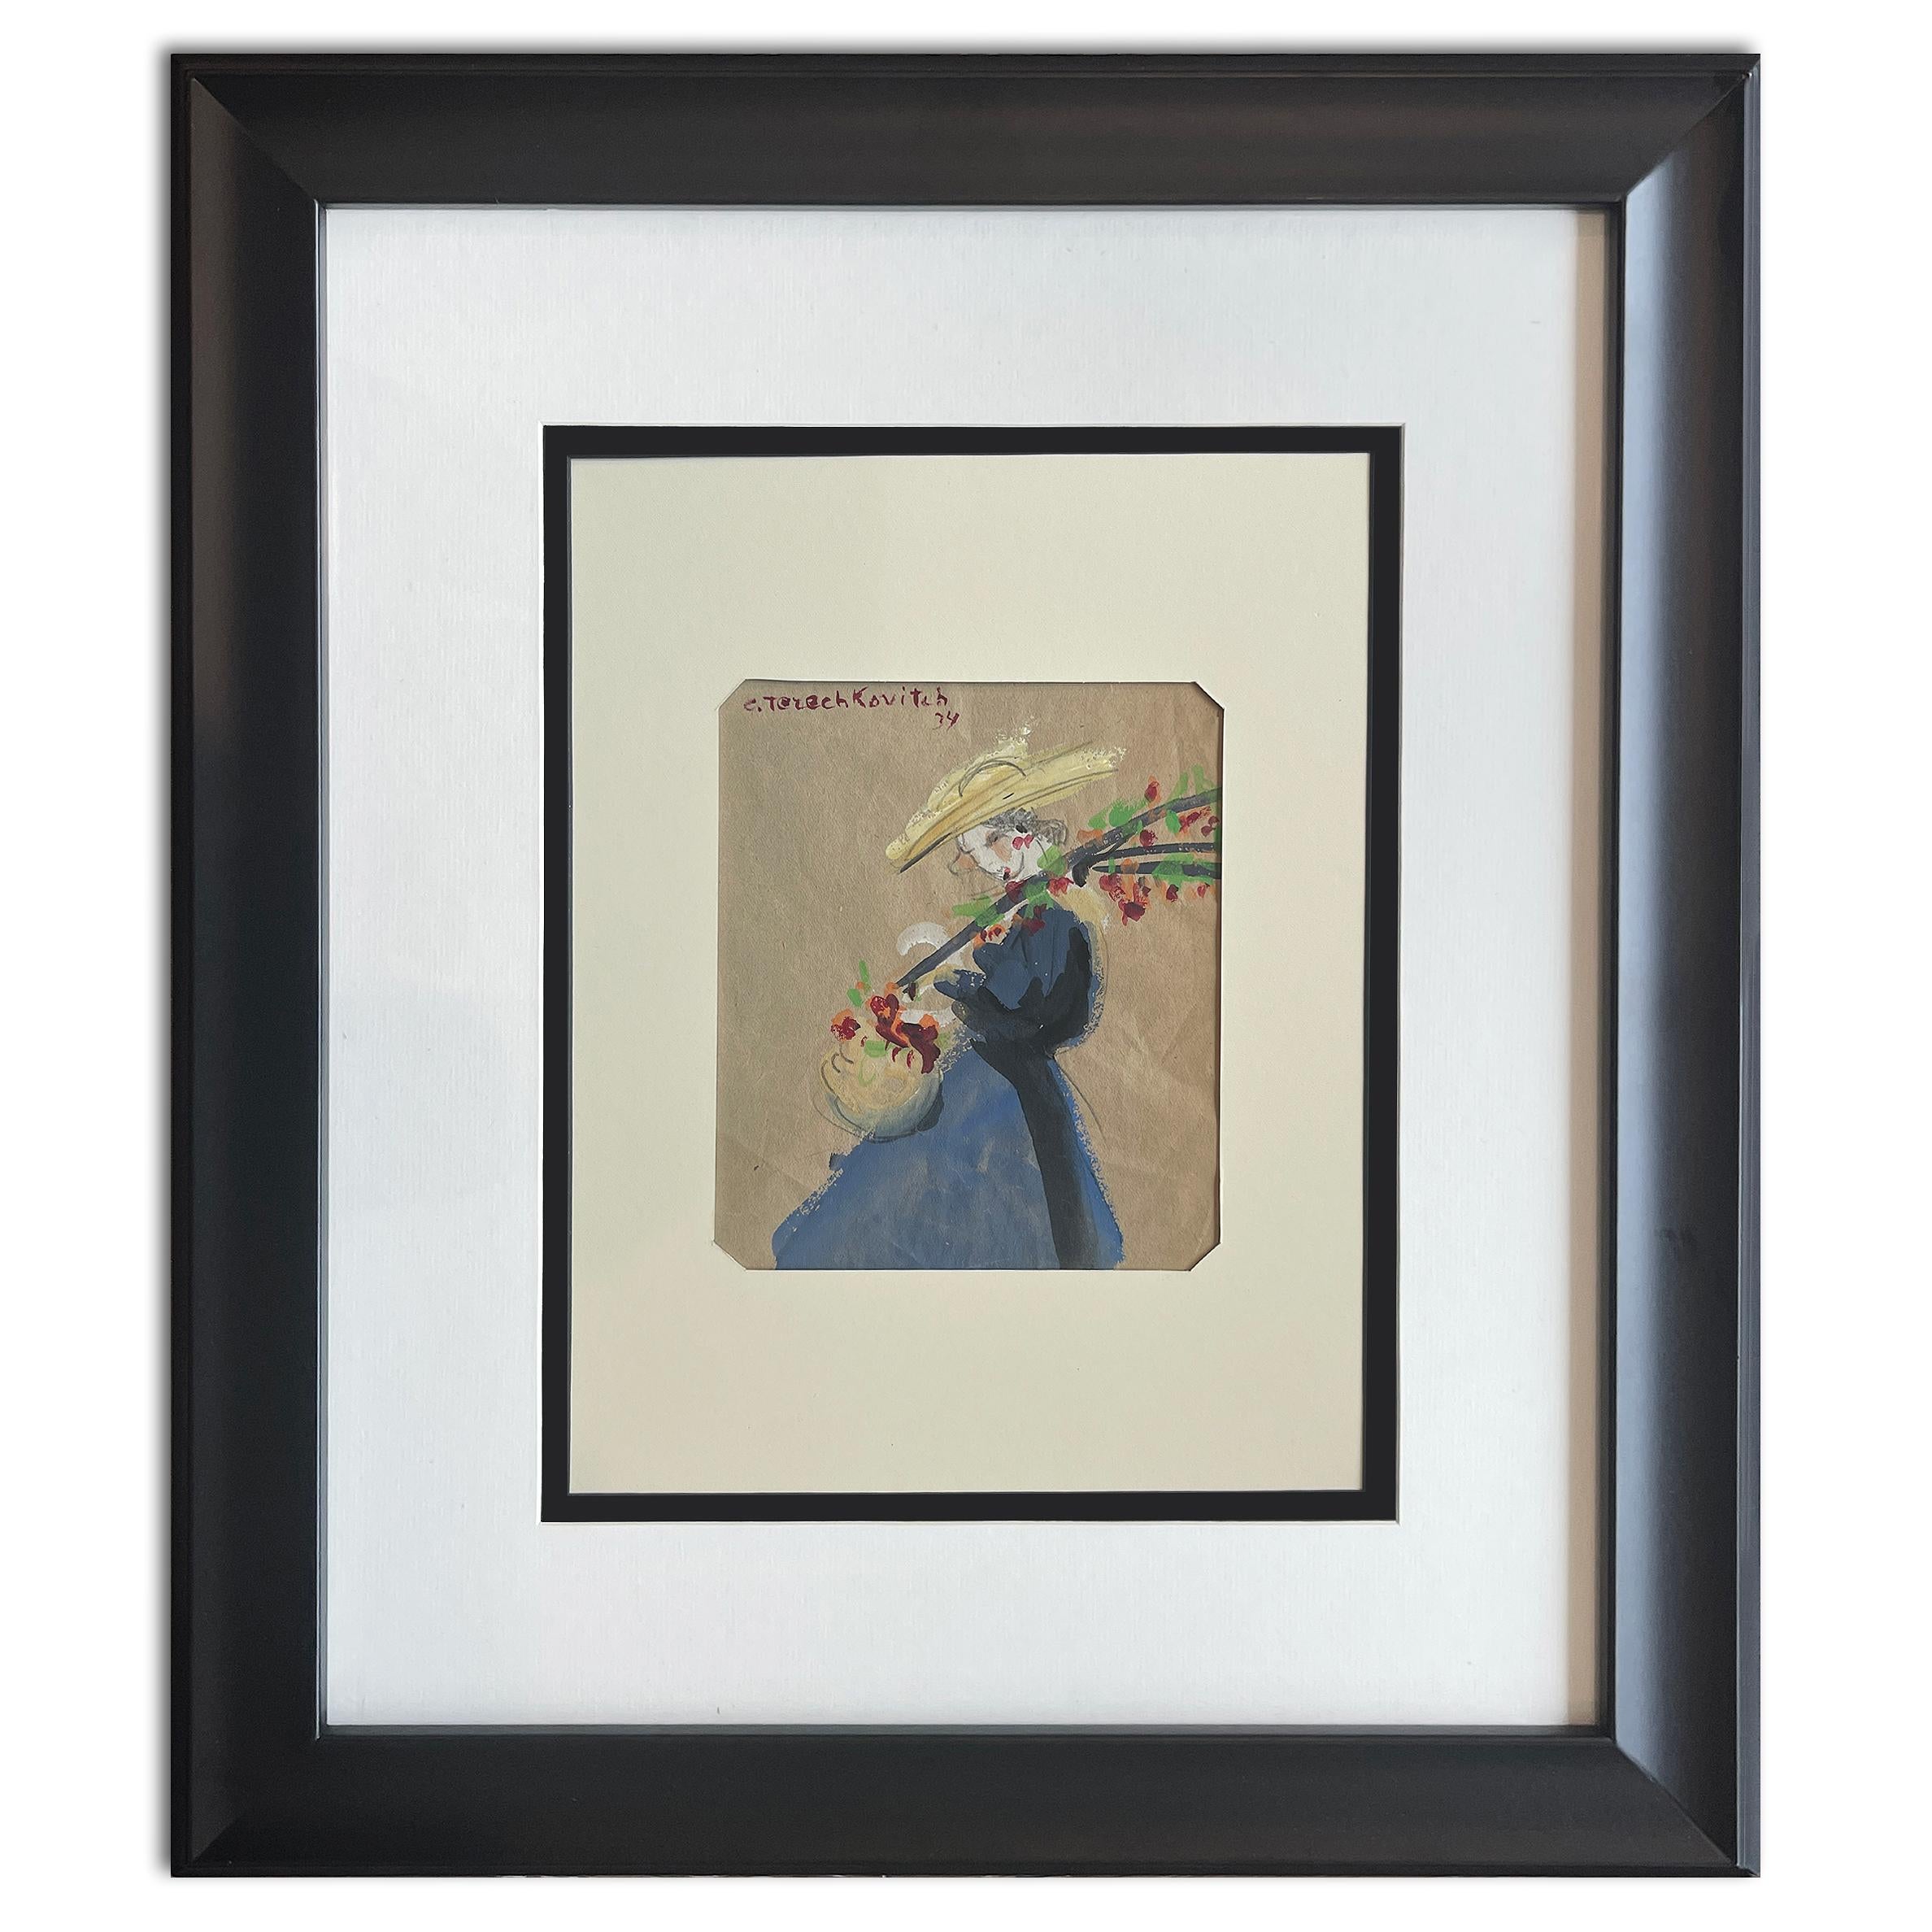 Constantin Andréevitch TERECHKOVITCH (1902 – 1978)
Russian Art - Russian Artist
Drawing watercolor and charcoal pencil depicting a lady holding a basket with a bunch of flowers
Signed upper left and dated 34 (1934)
Condition:
Original condition,